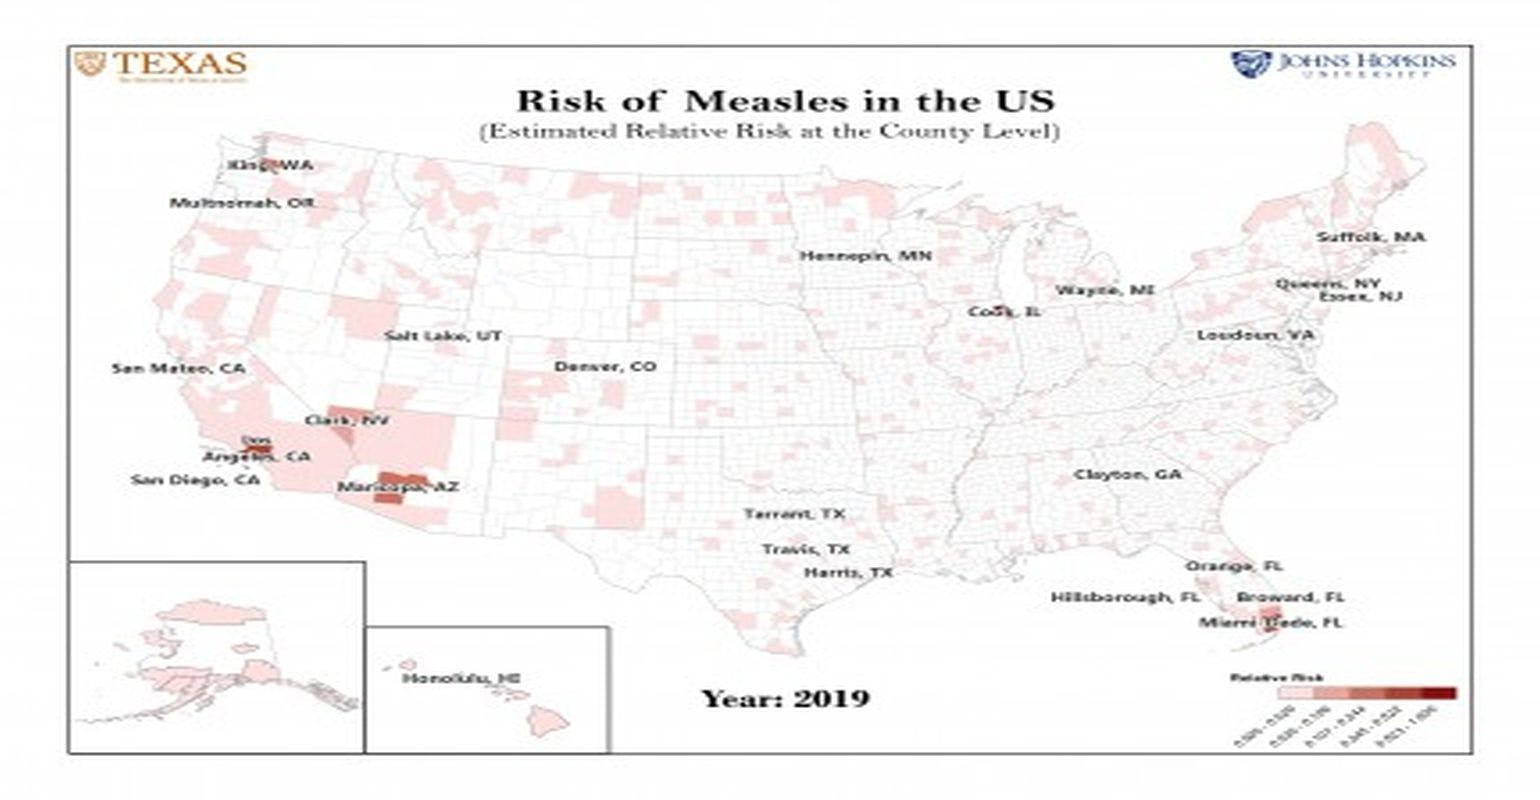 New Analysis Predicts Top 25 U.S. Counties at Risk for Measles Outbreaks